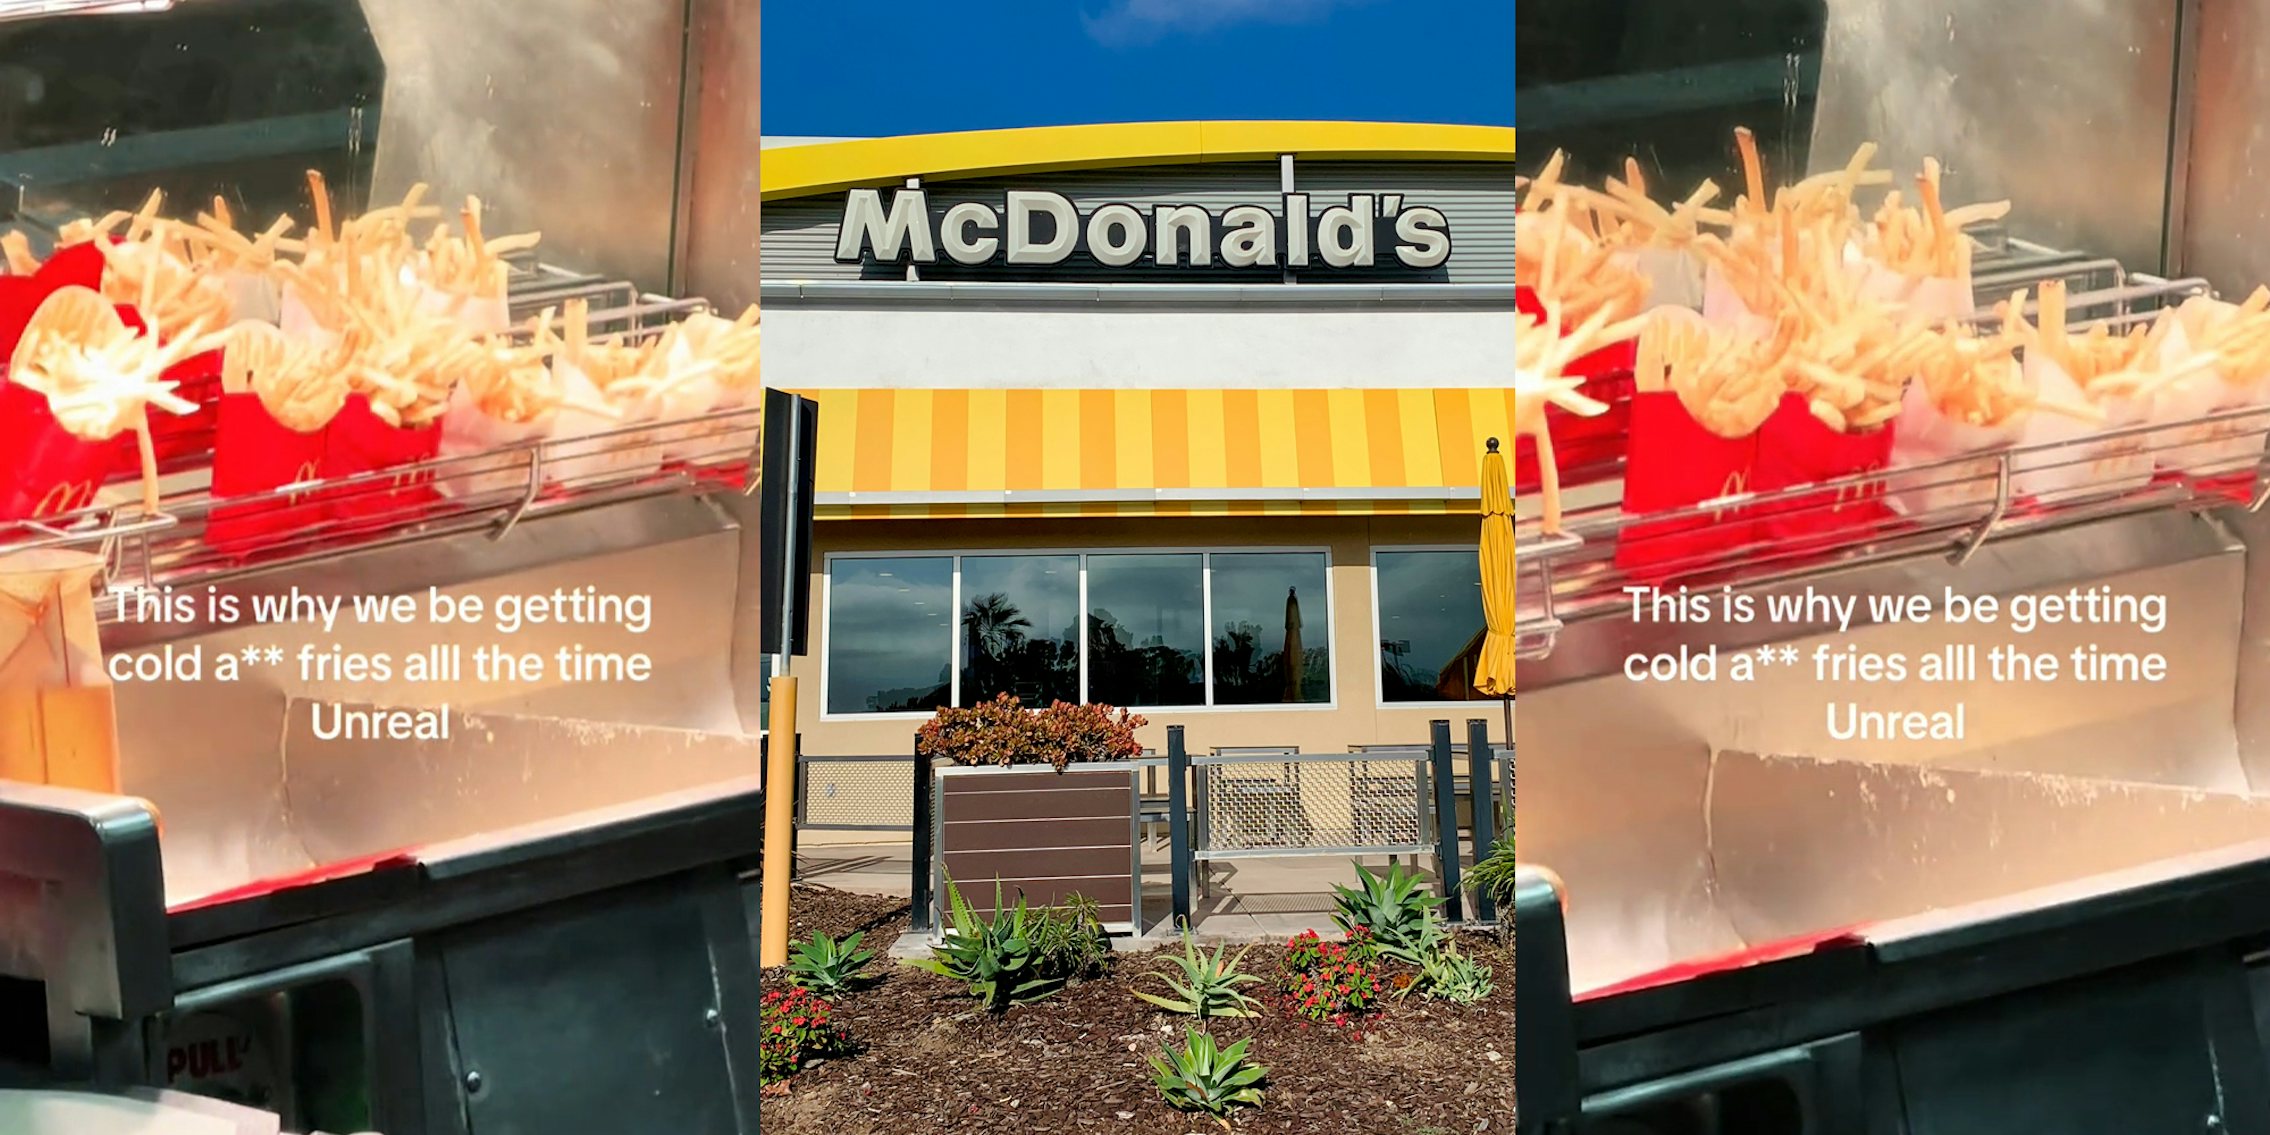 McDonald's fry station with fries in containers with caption 'This is why we be getting cold a** fries all the time Unreal' (l) McDonald's building with sign (c) McDonald's fry station with fries in containers with caption 'This is why we be getting cold a** fries all the time Unreal' (r)